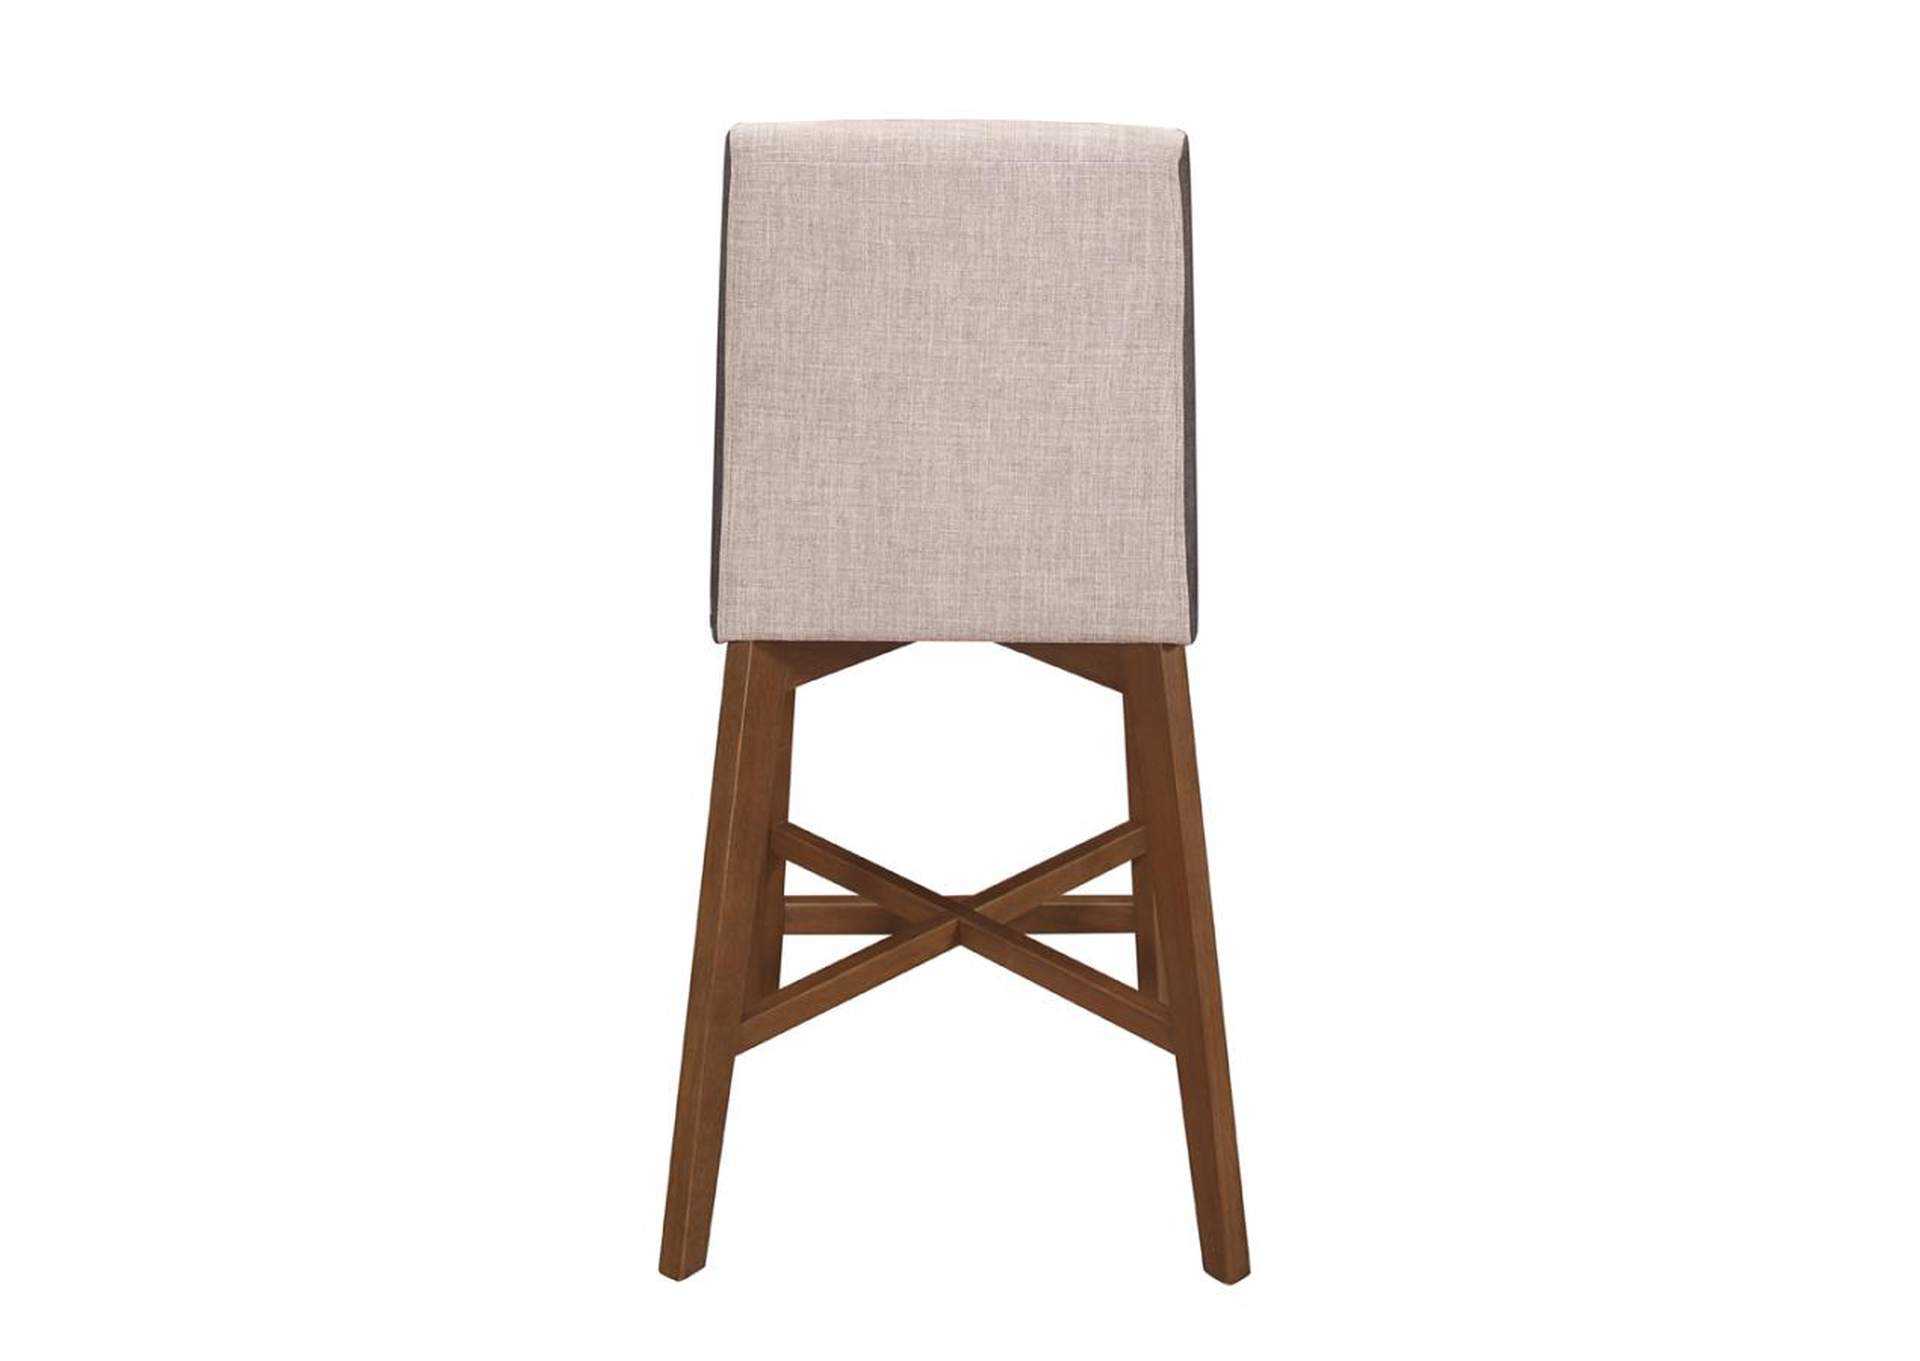 Logan Upholstered Counter Height Stools Light Grey And Natural Walnut (Set Of 2),Coaster Furniture